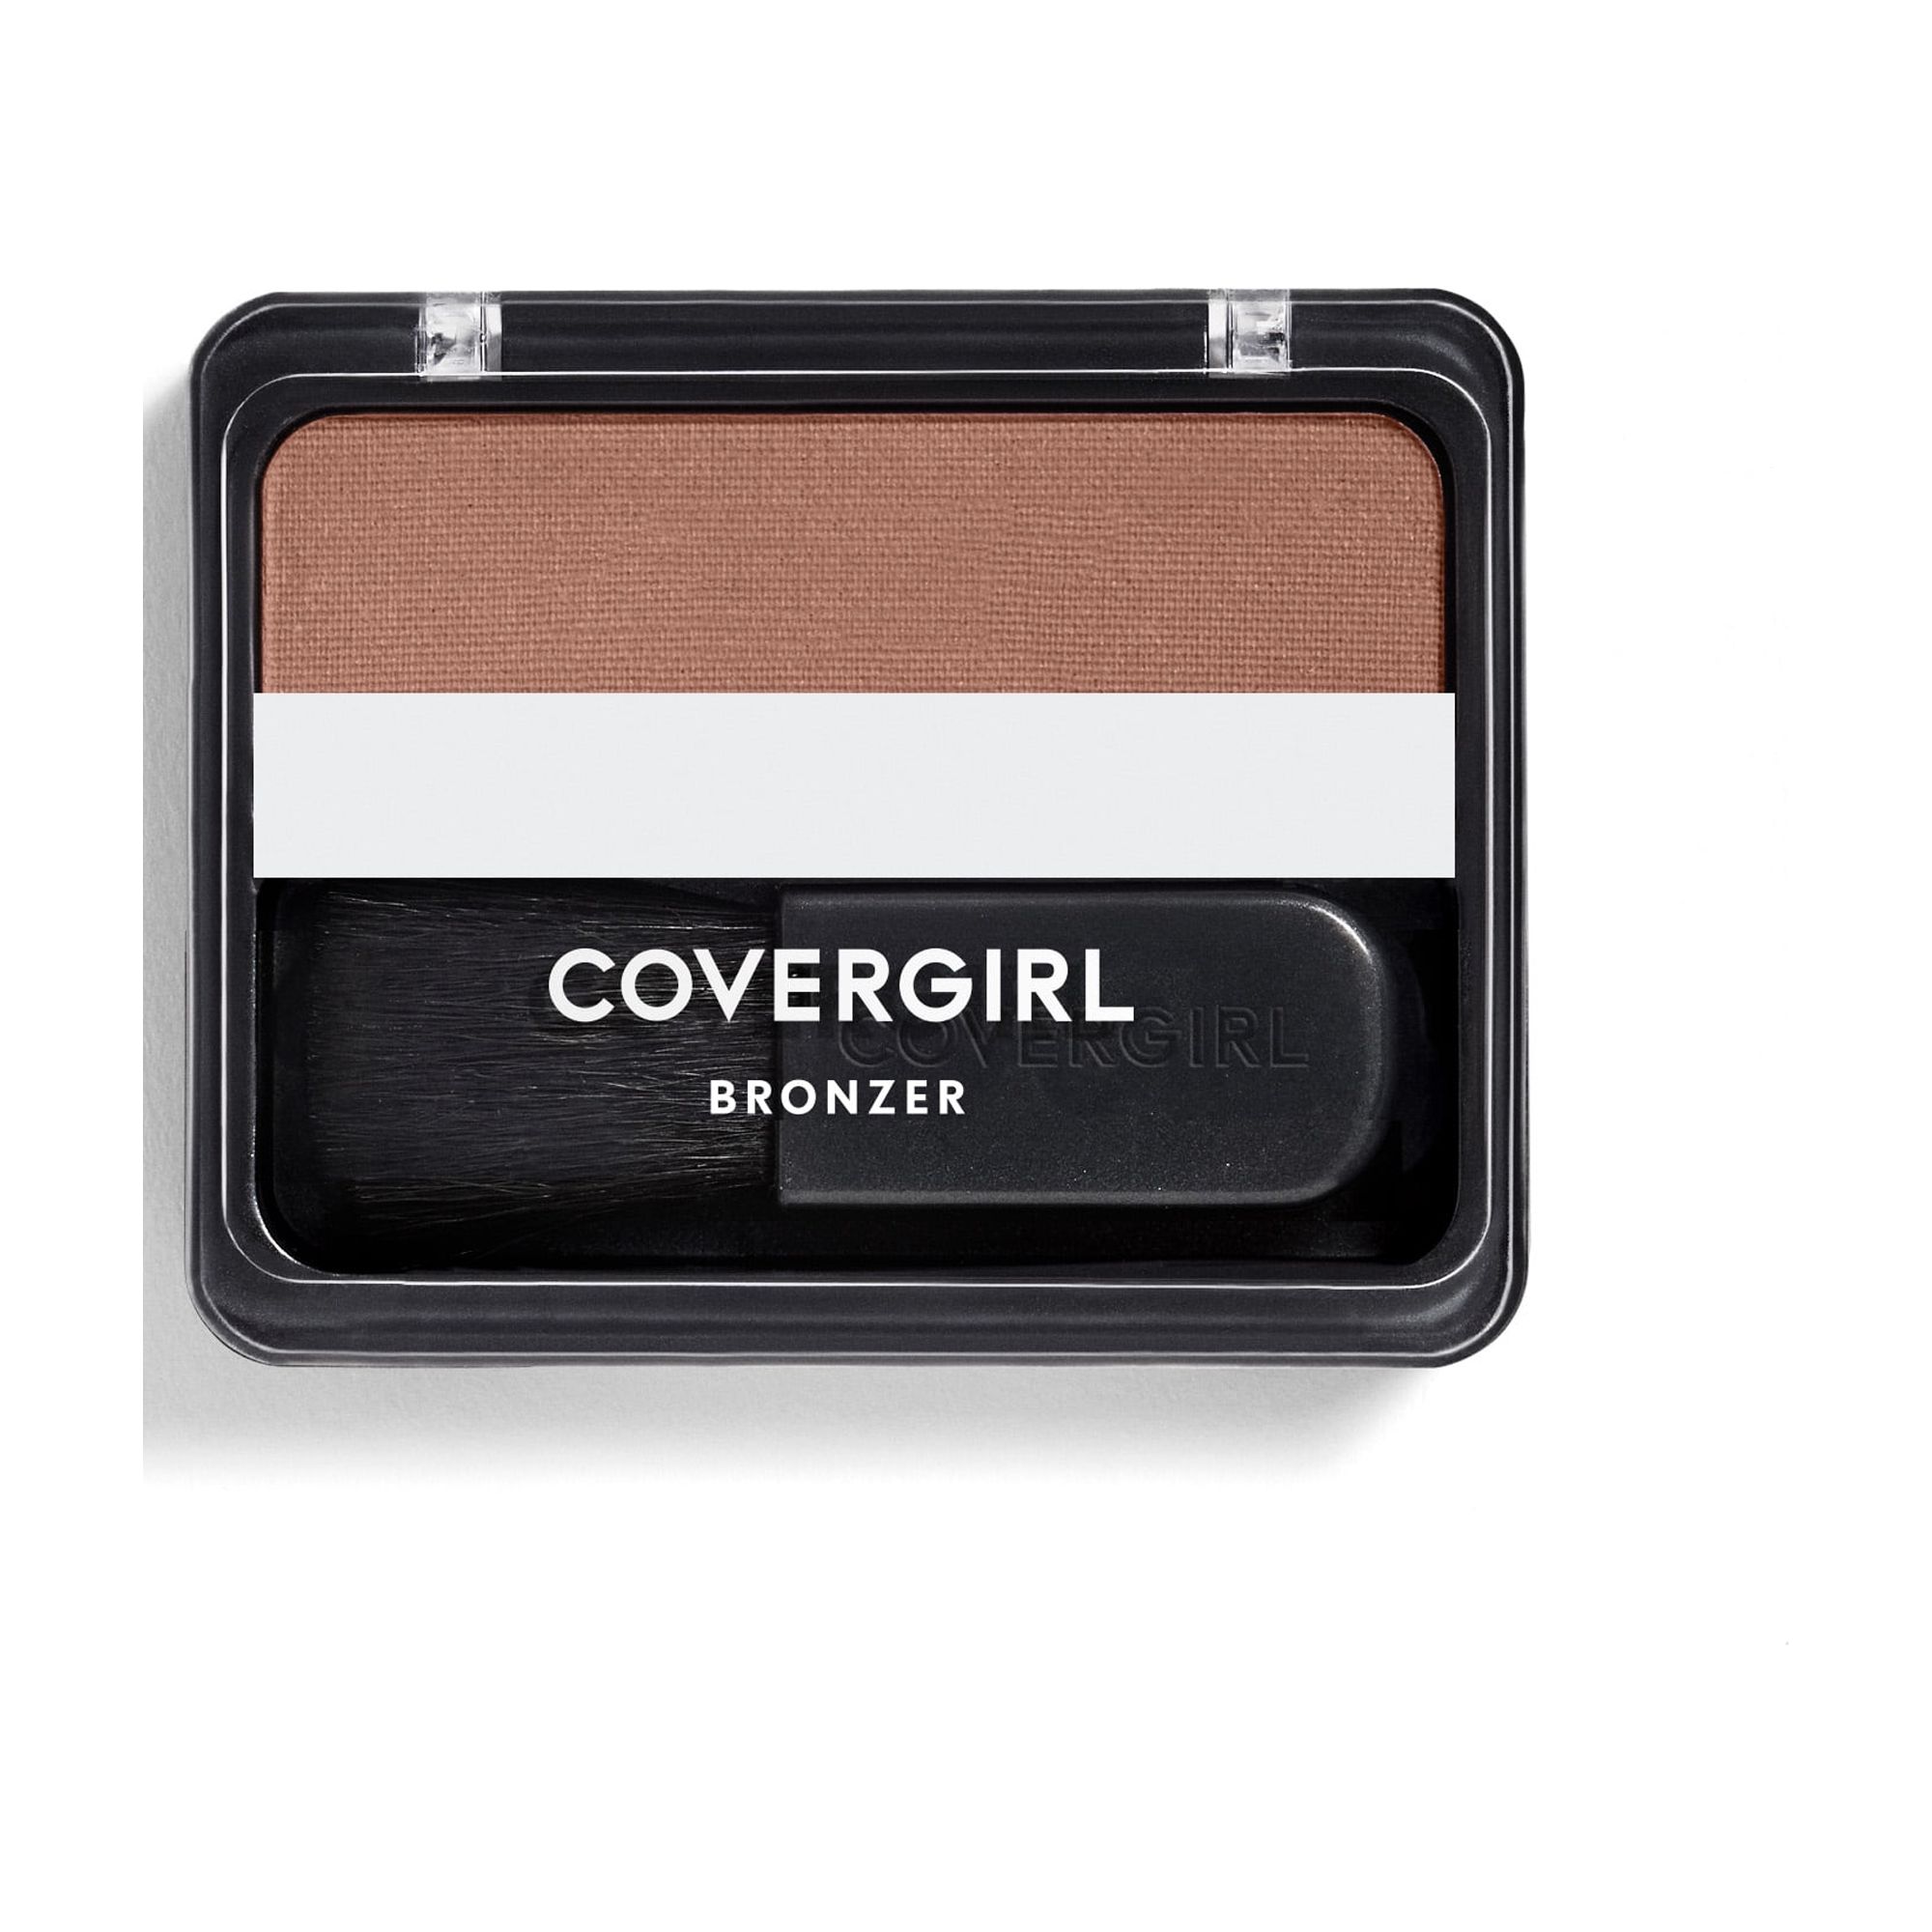 COVERGIRL Cheekers Blendable Powder Bronzer, 102 Copper Radiance - image 1 of 5